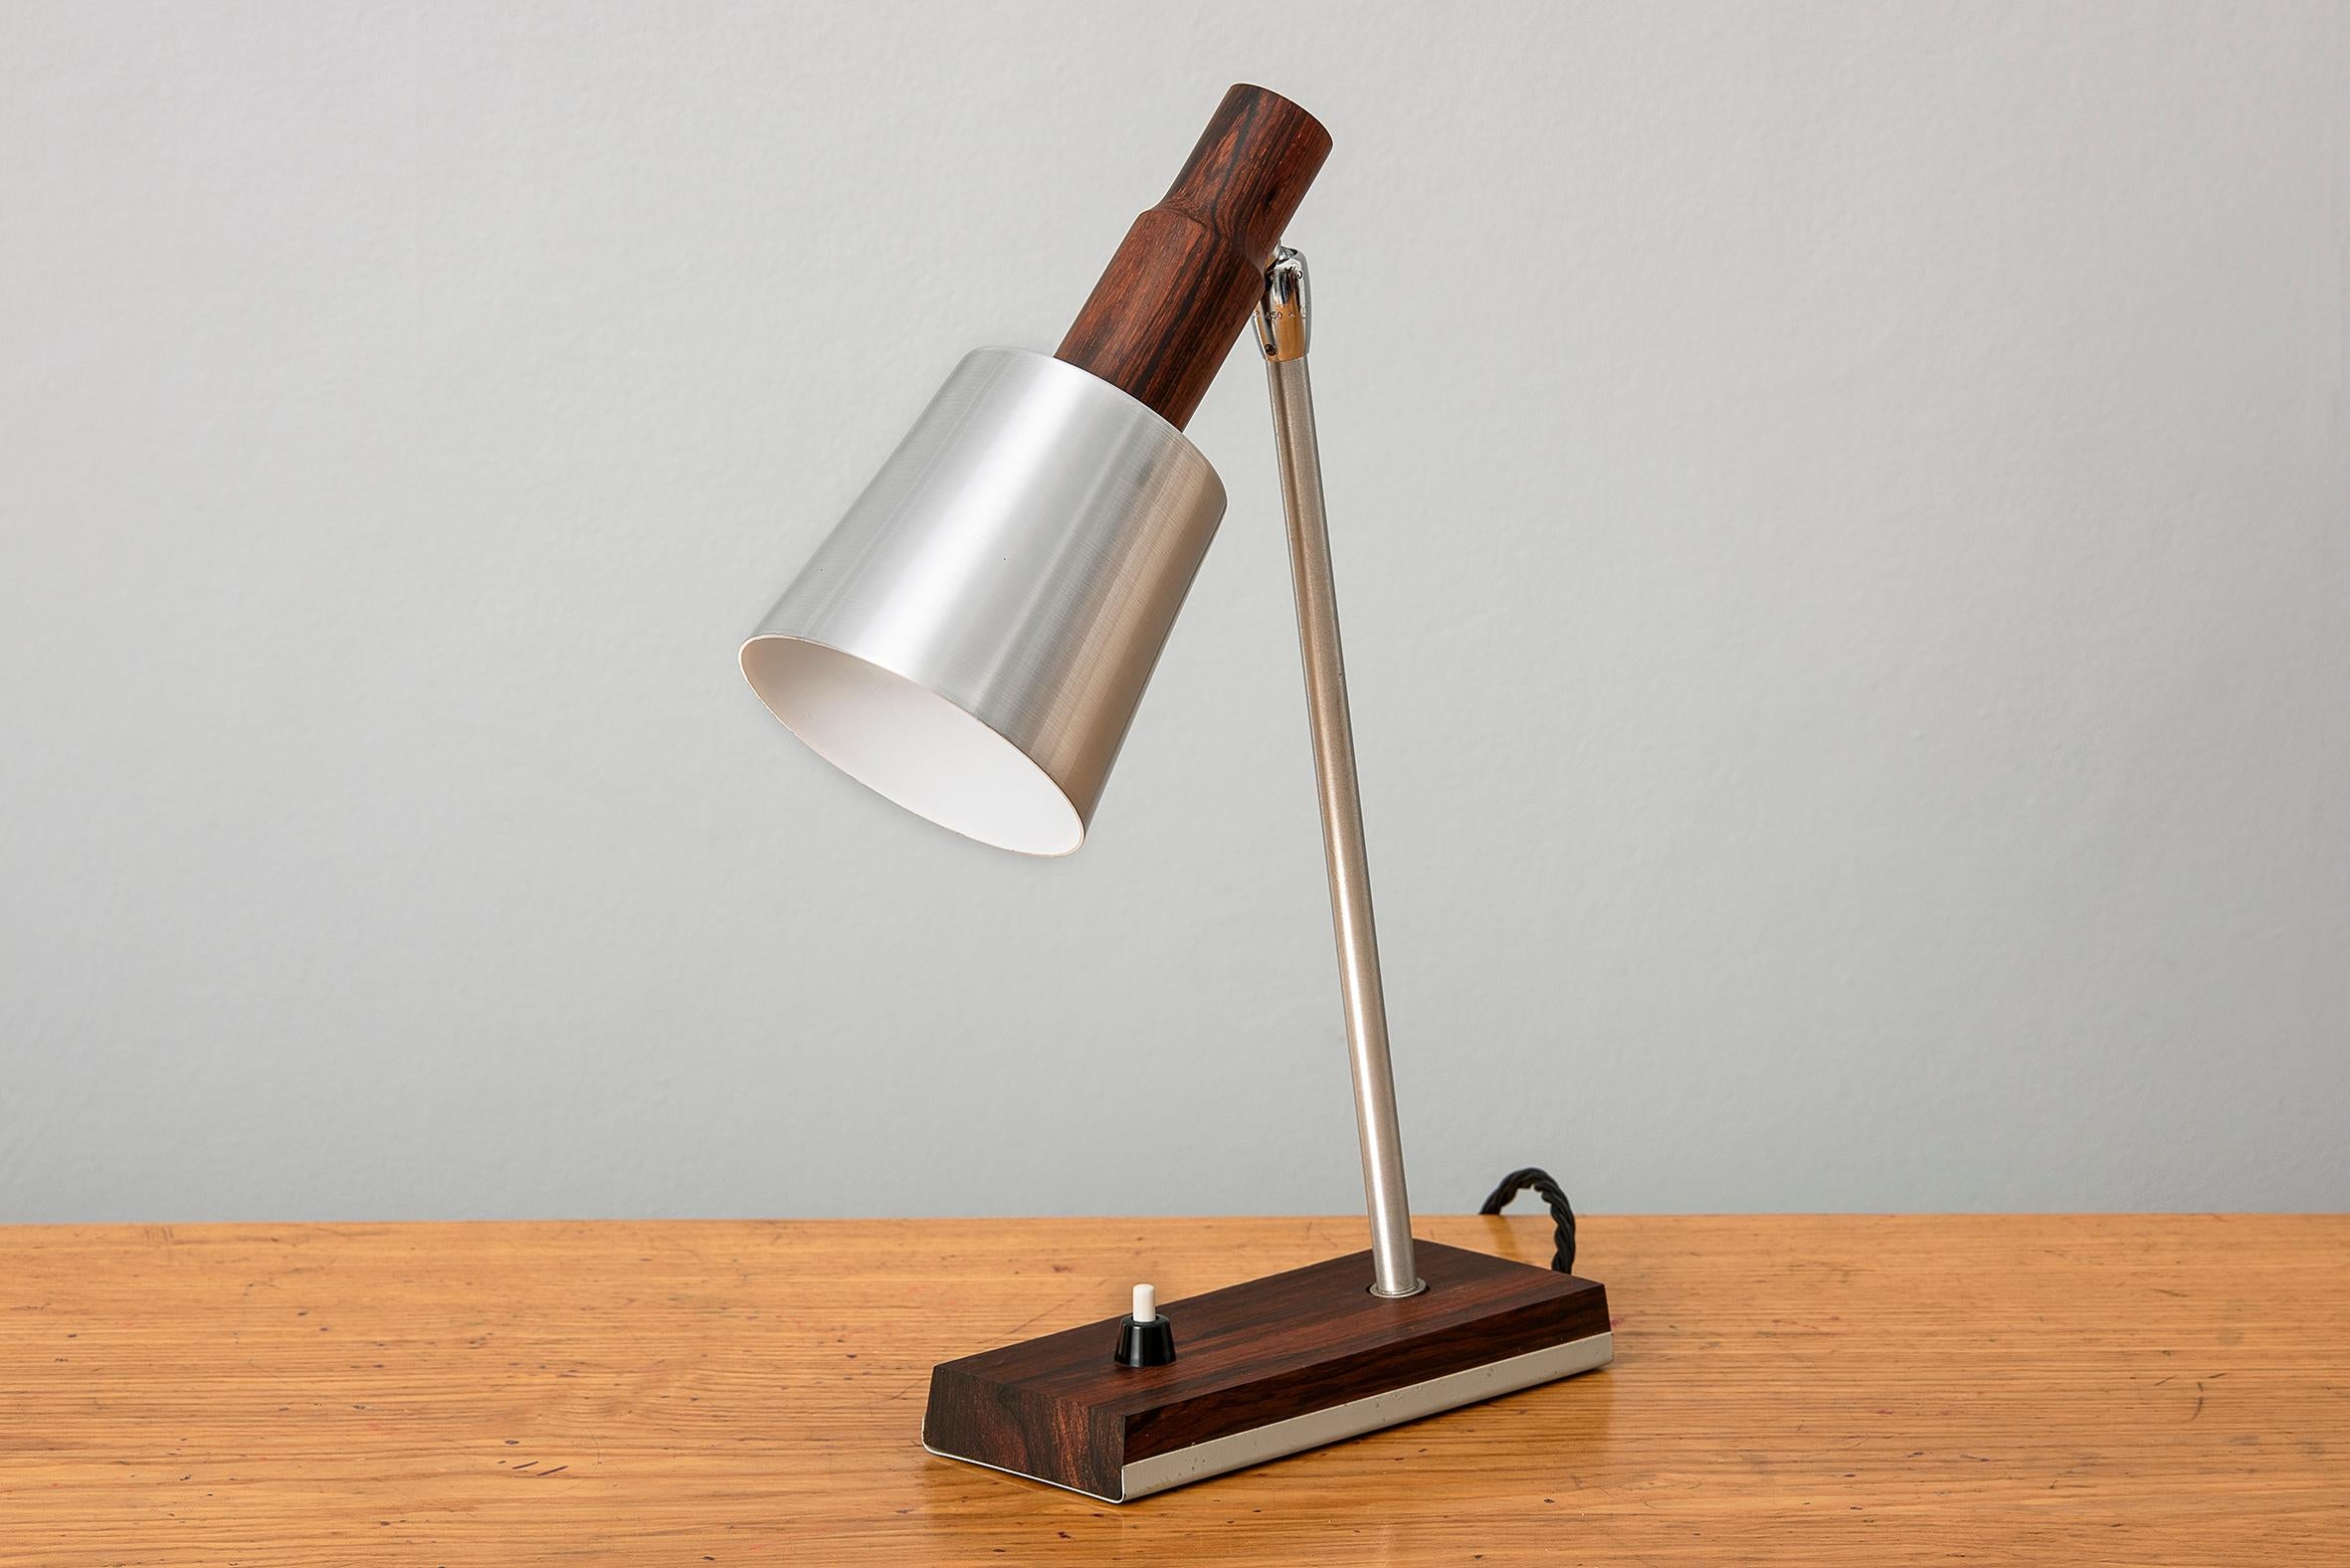 A rare example of this desk or table ‘silva’ lamp by Lyfa/OMI. Superb wood and steel and aluminium construction and multidirectional head. Rewired. A highly unusual piece as the cone wood top is turned, tapered and refined, unlike the typical